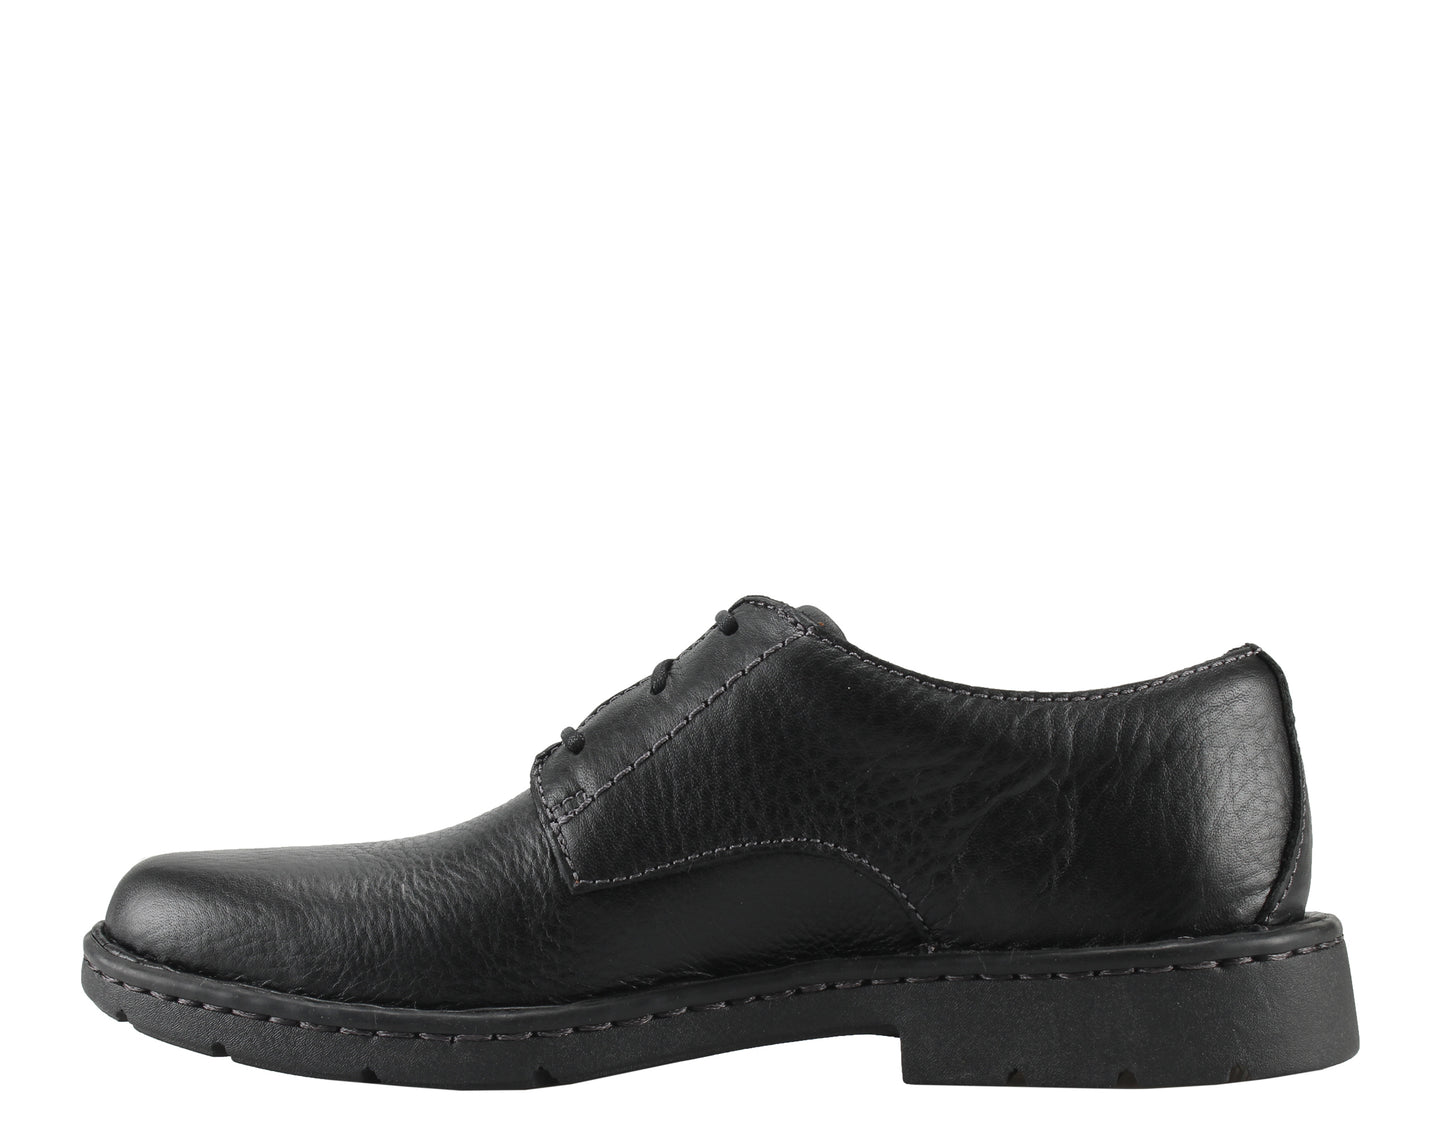 Clarks Stratton Way Men's Casual Shoes